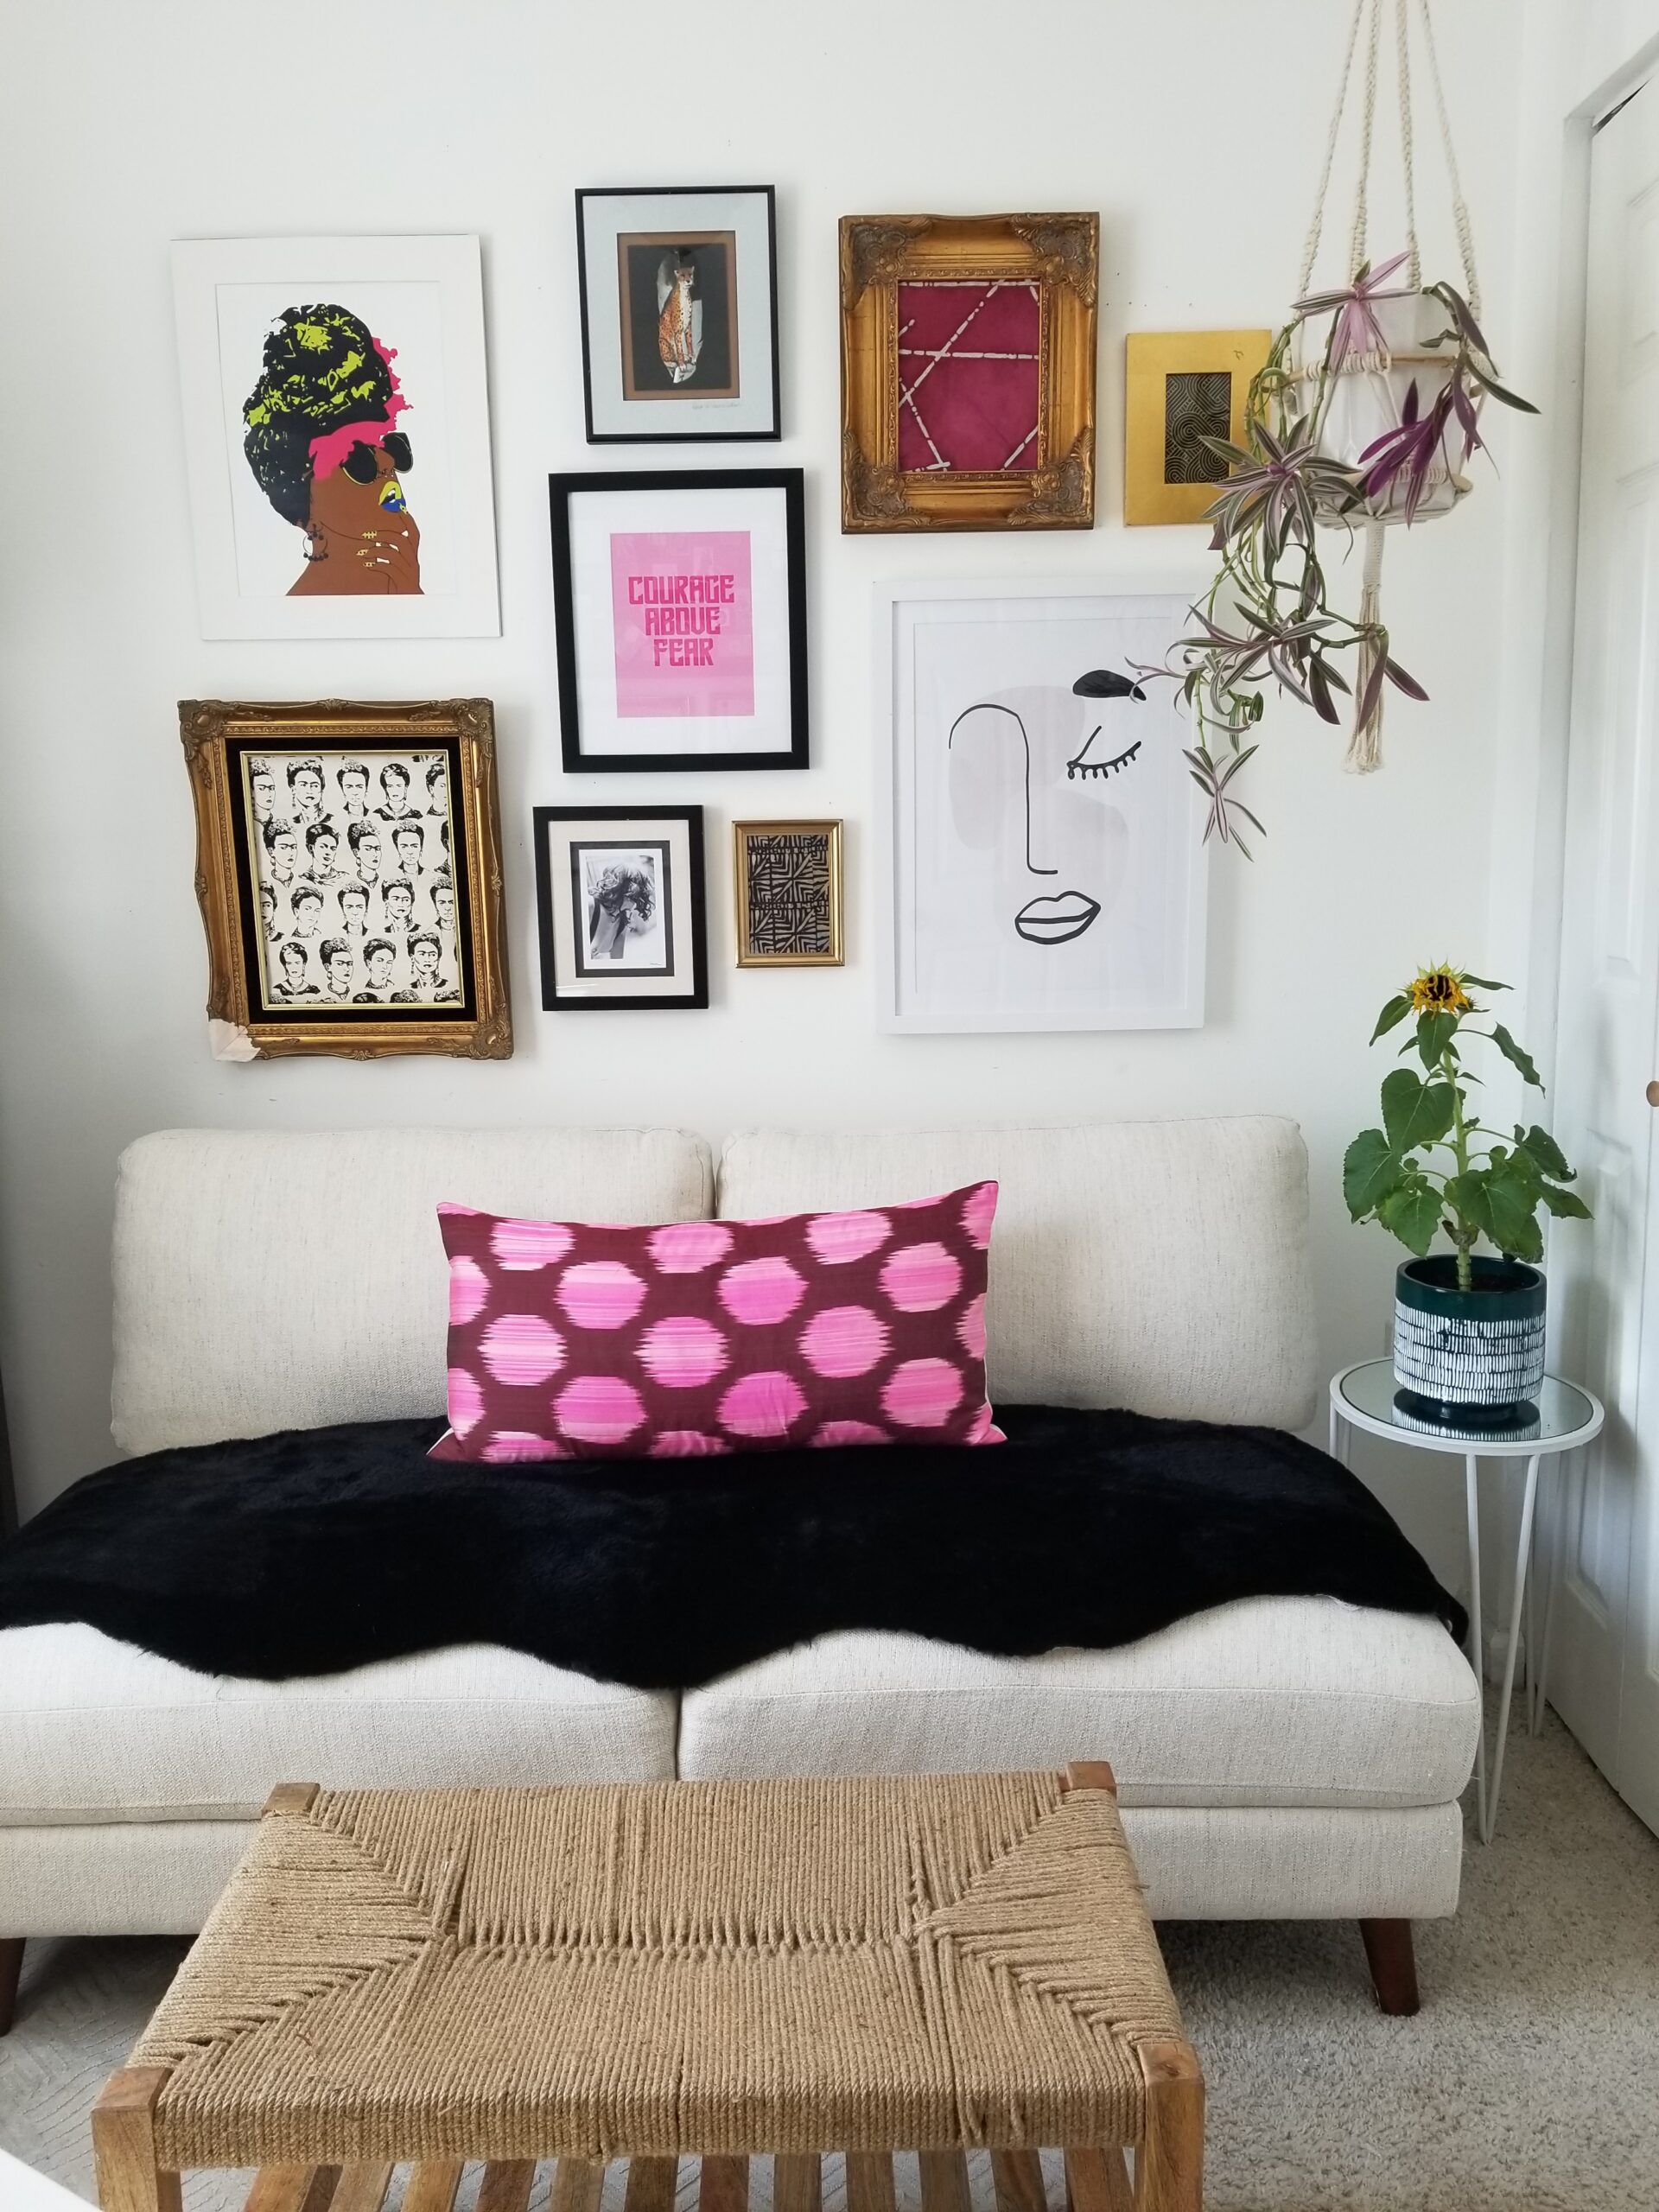 How to Keep Couch Cushions From Sliding, Thrifty Decor Chick